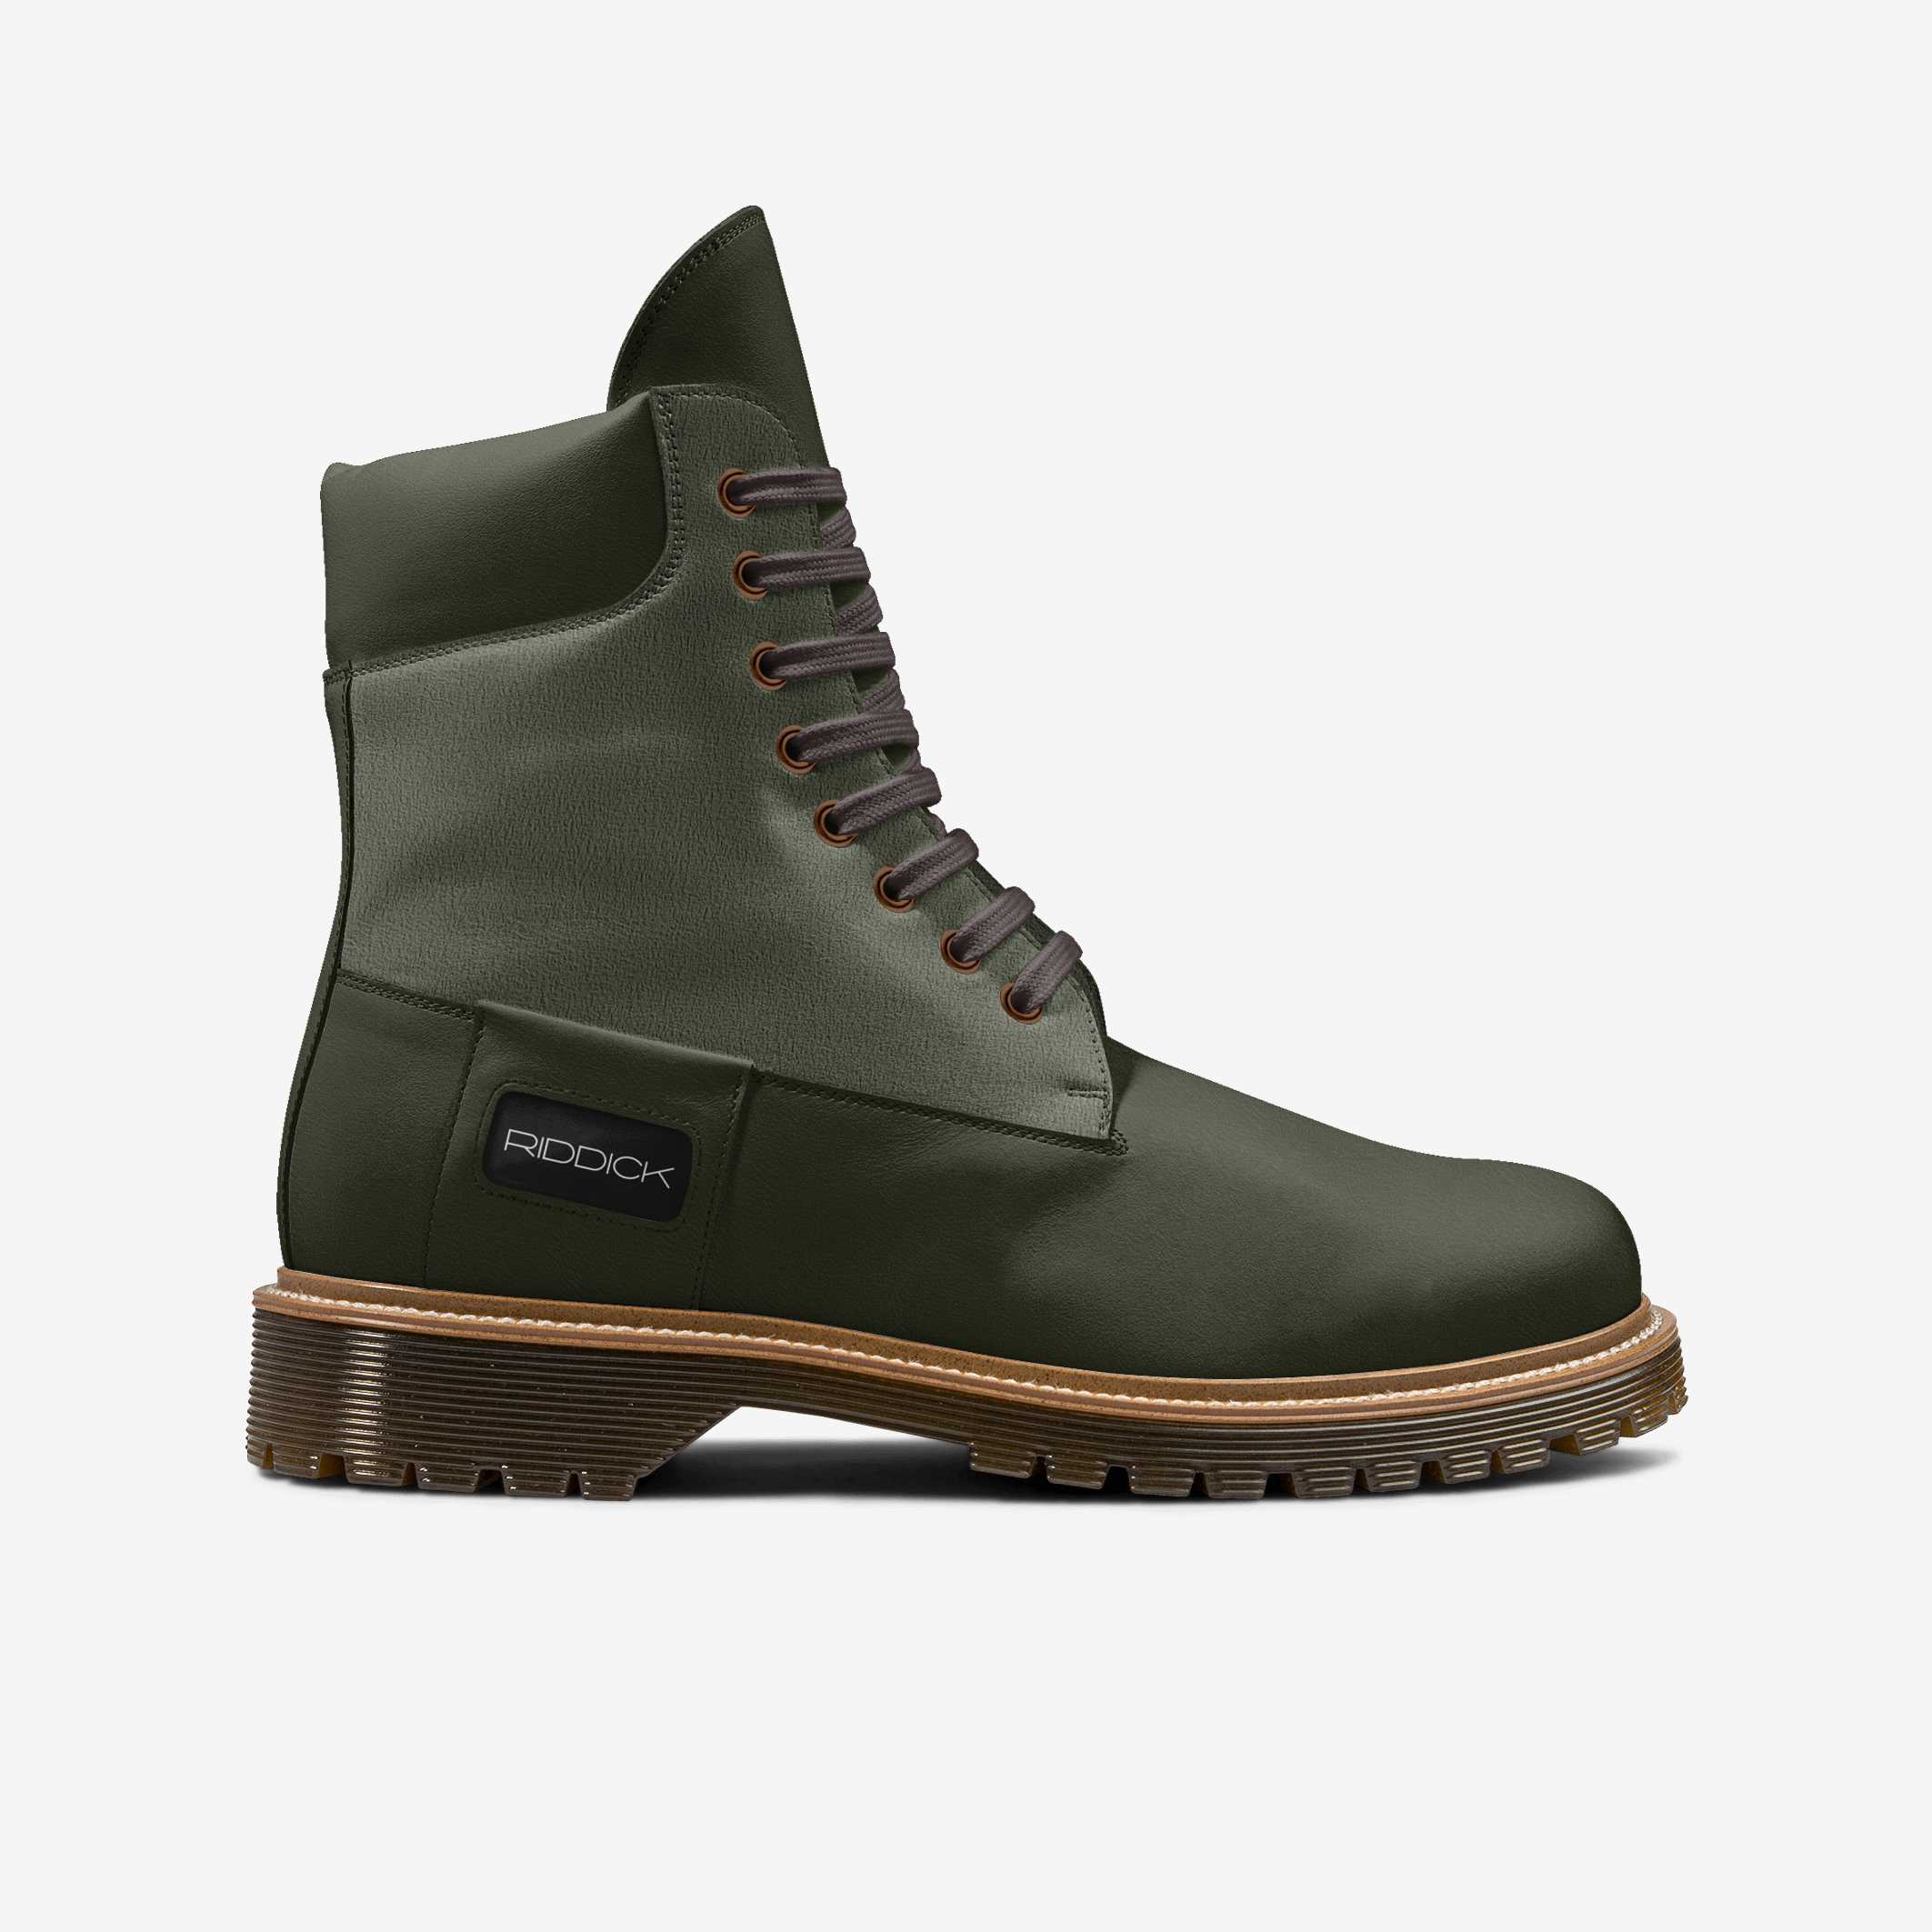 RED DAWN IN OD GREEN - Riddick Shoes Shoe Riddick Shoes   